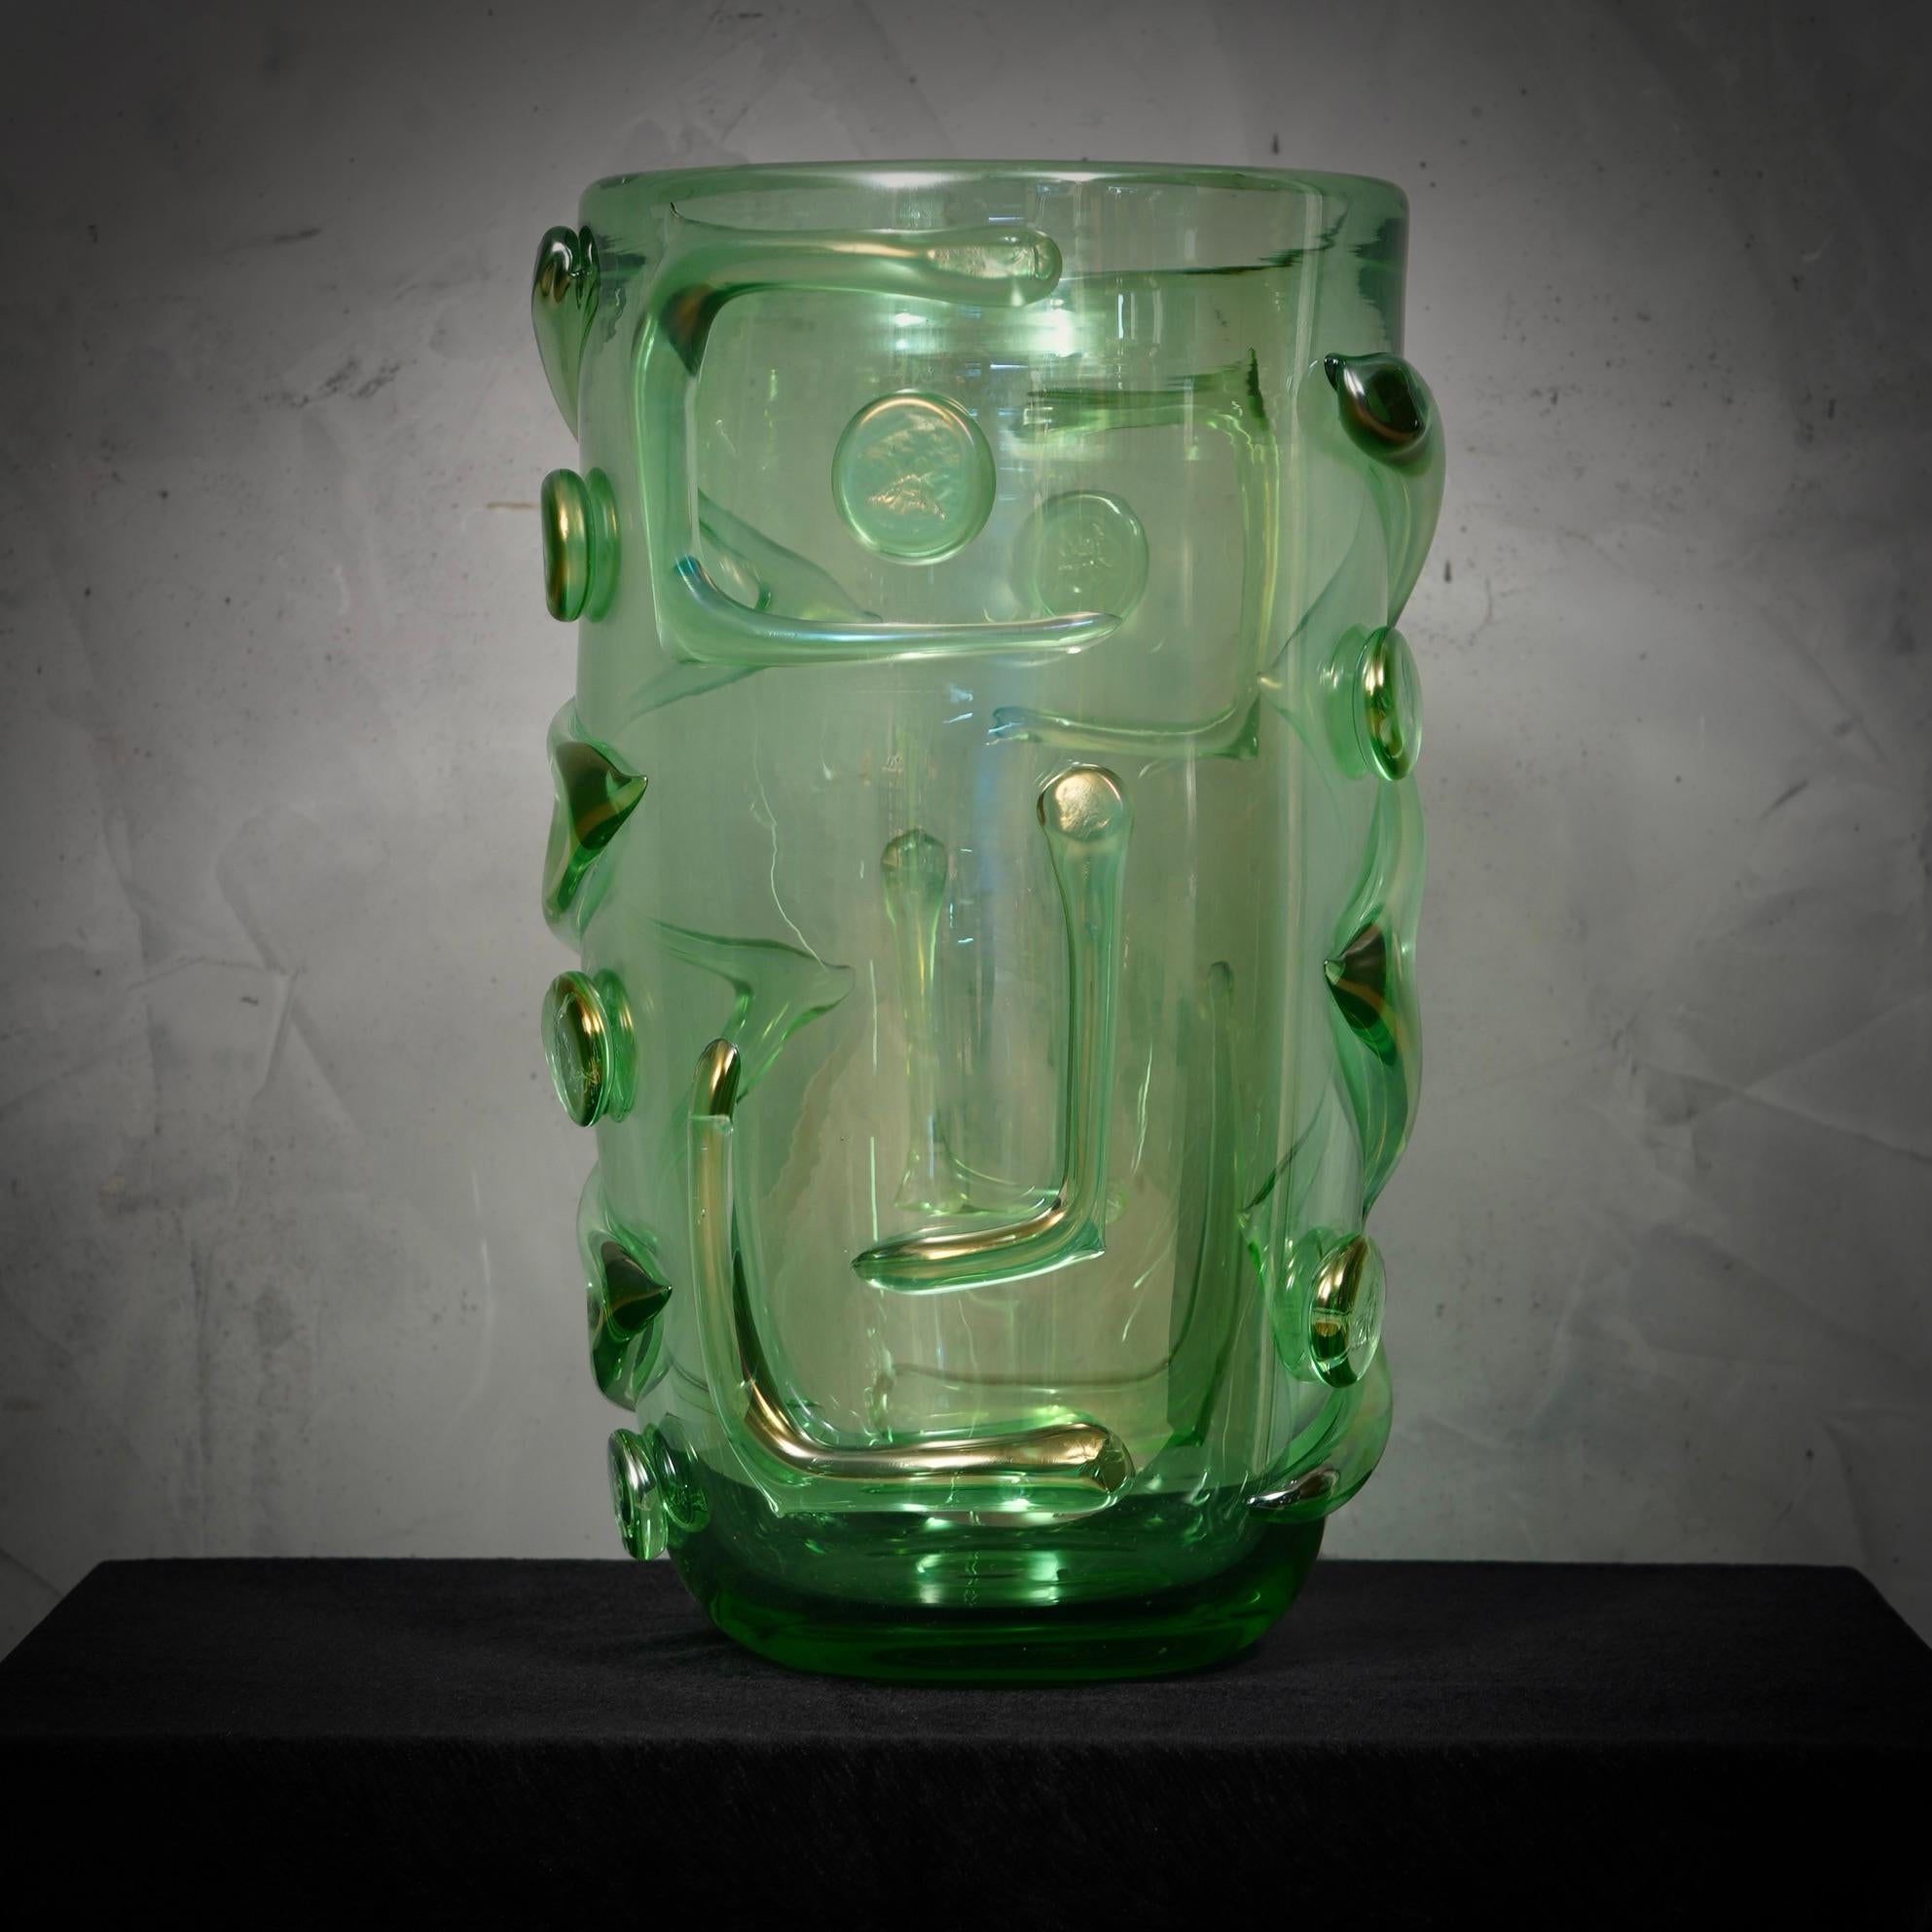 Splendid Murano glass vase in marine green color. Note the beautiful hot-attached castings. A supreme artistic manufacture. In this factory you can feel all the Venetian flavor.

The vase is composed of a large upper cup, onto which glass fusions of